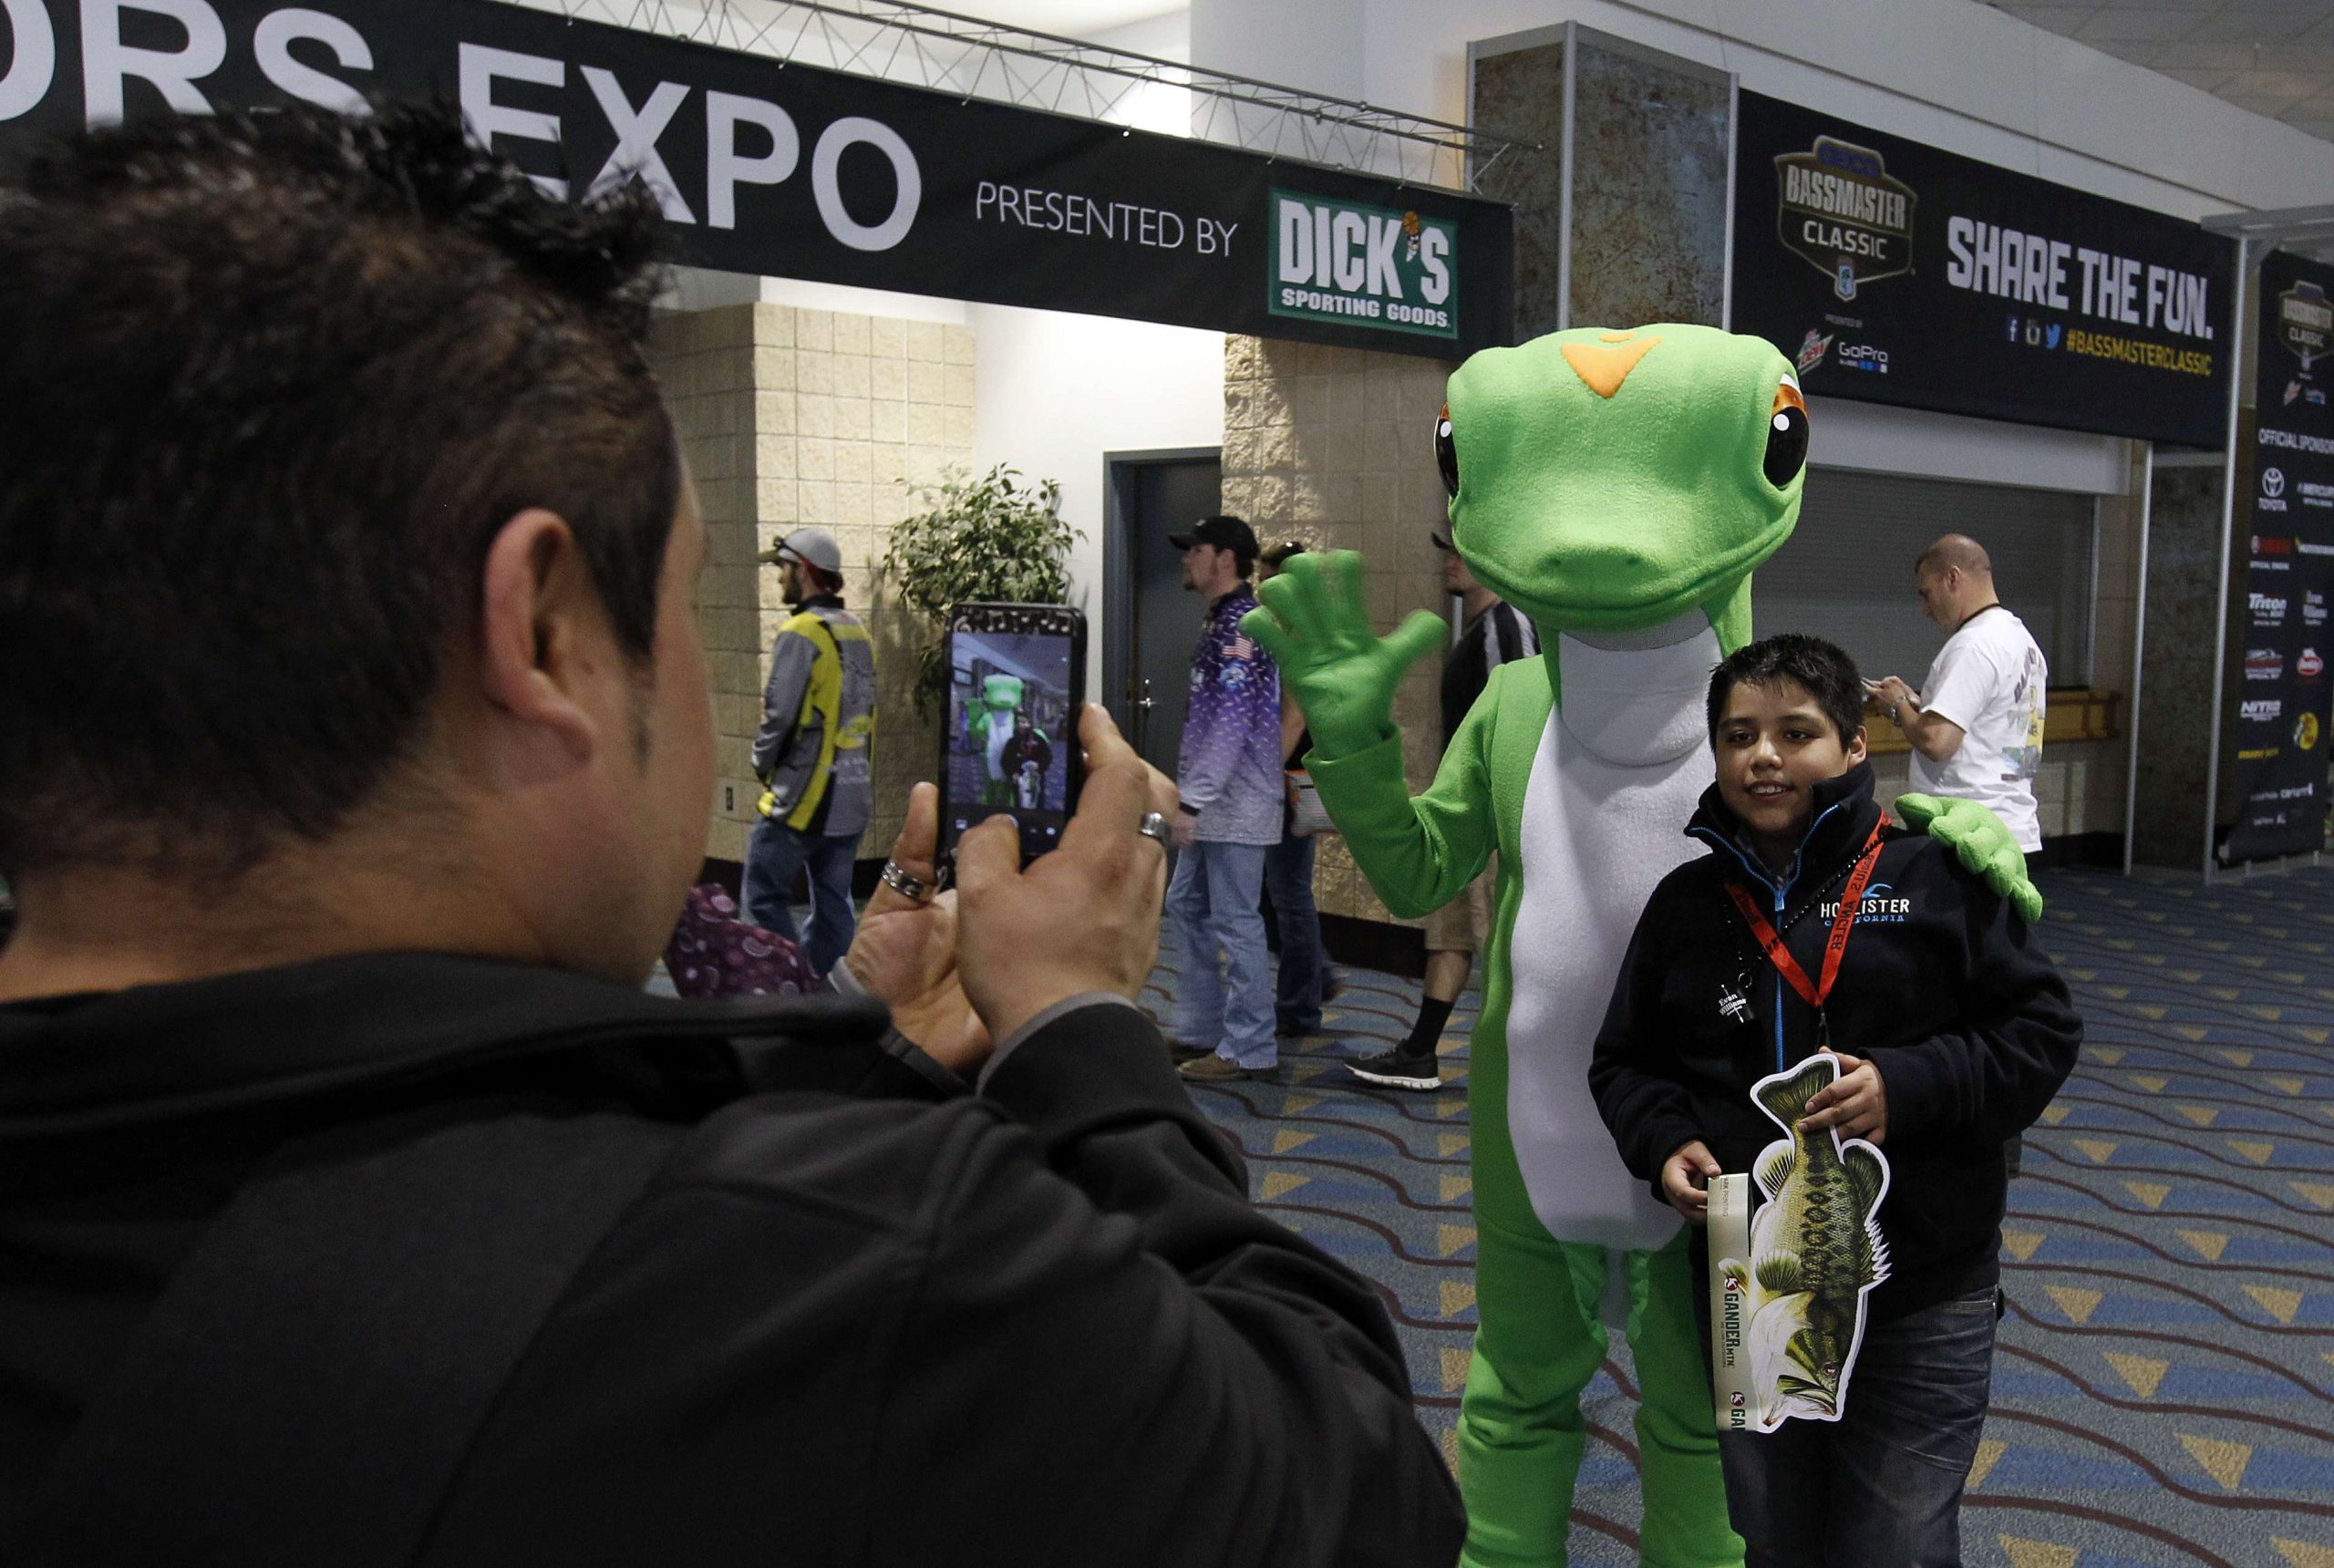 Just like a famous angler, the GEICO Gecko couldn't get too far without getting some pictures with fans.